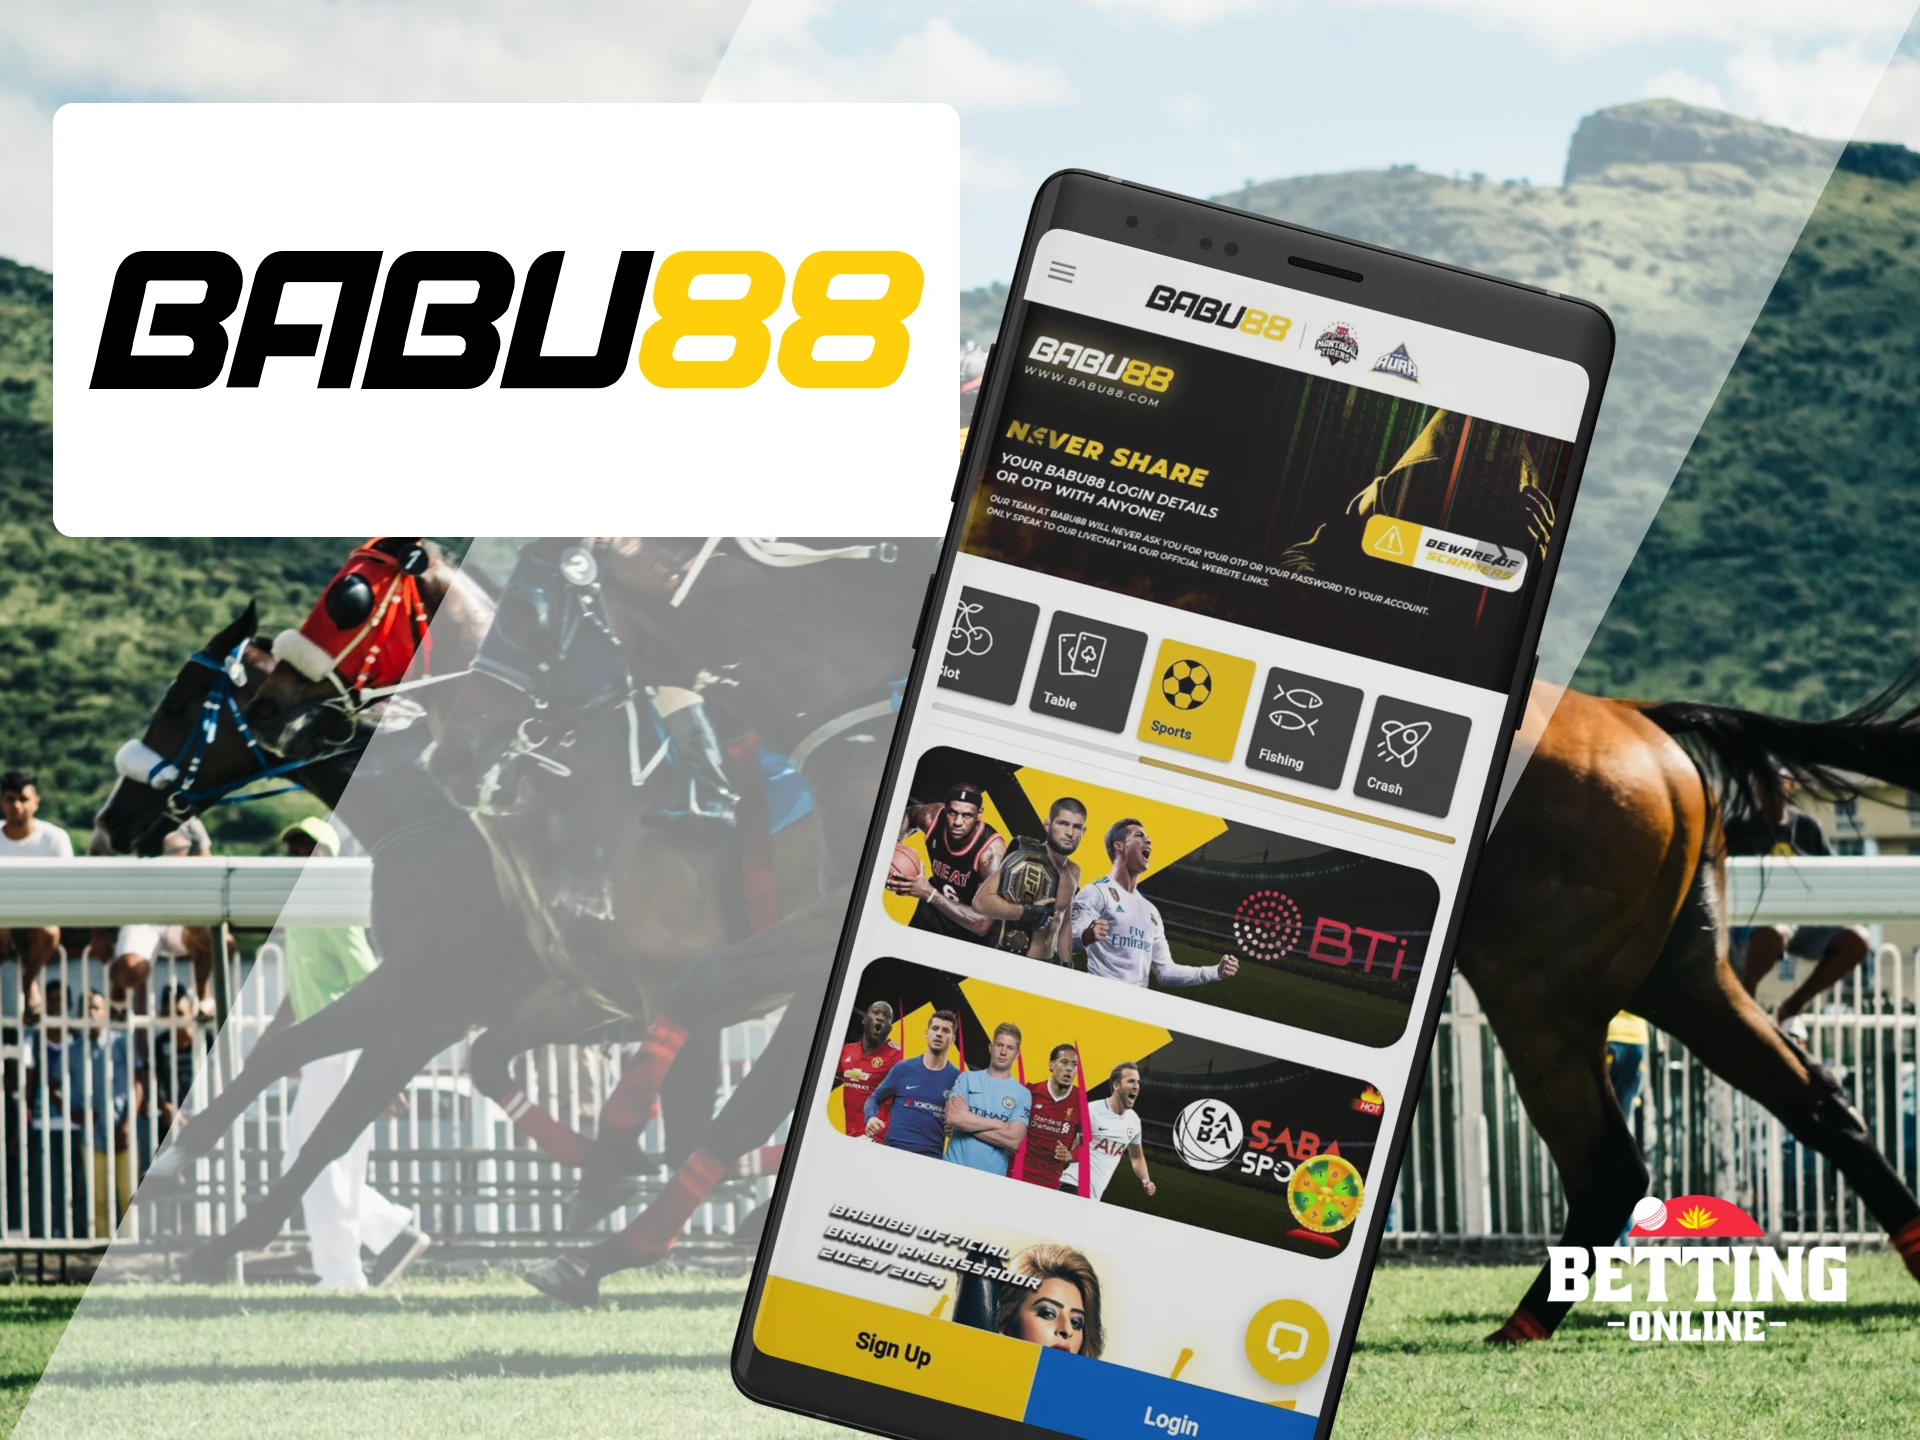 Babu88 app offers you betting on horse racing.